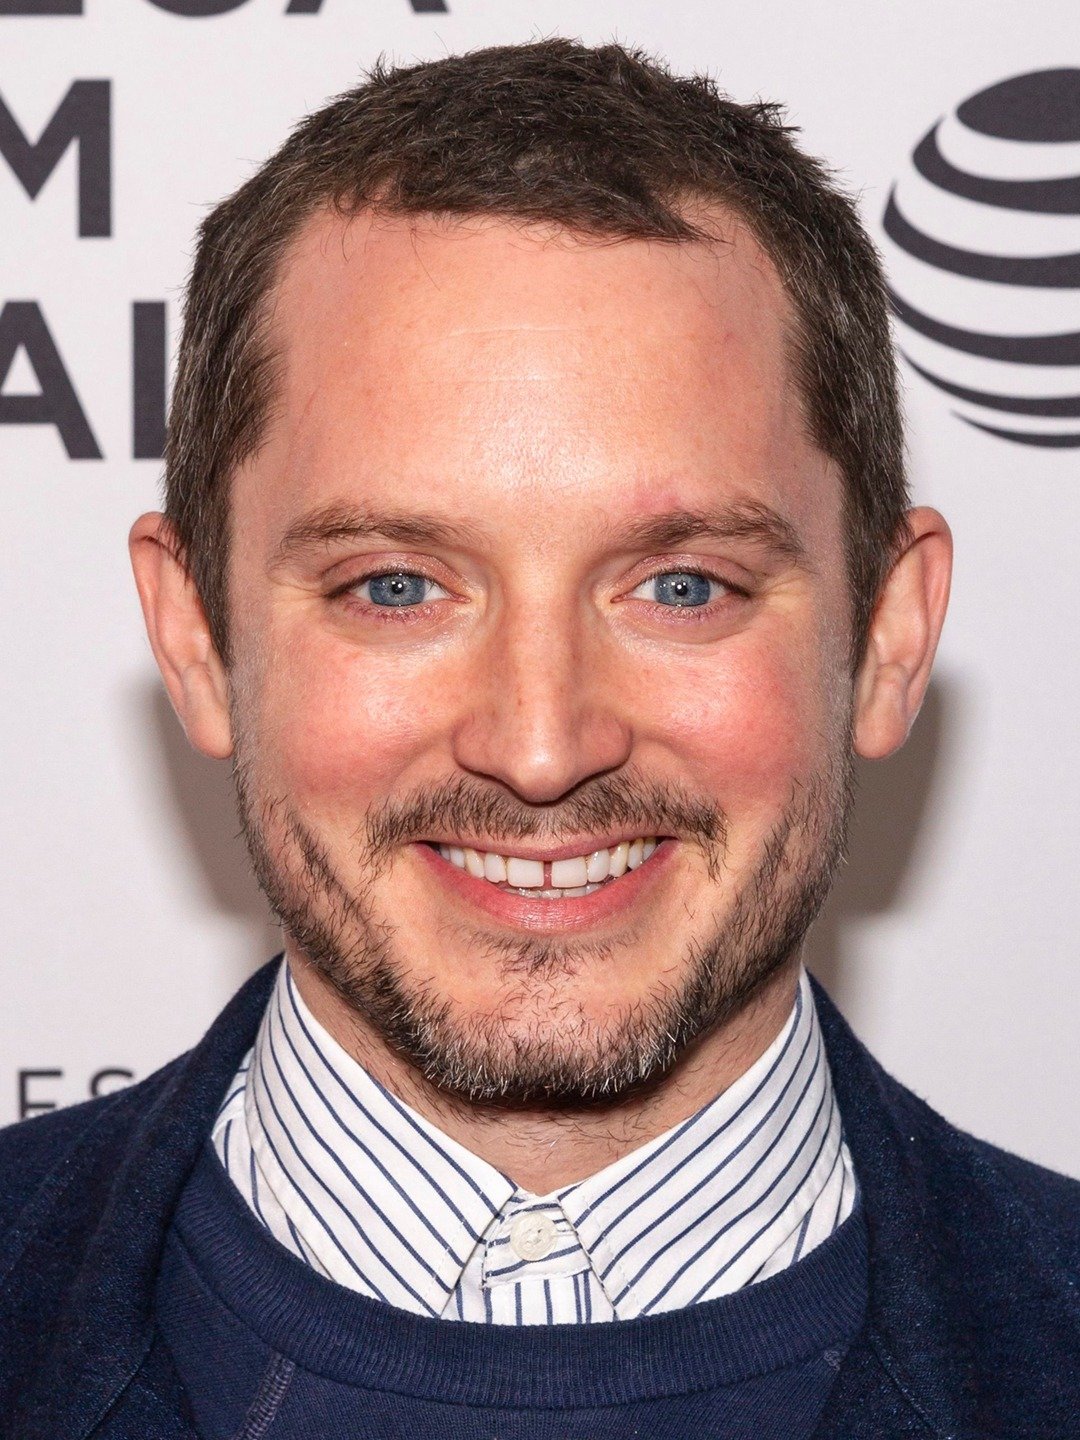 Elijah Wood - Best Known For Playing Frodo Baggins In LOTR Movie Trilogy